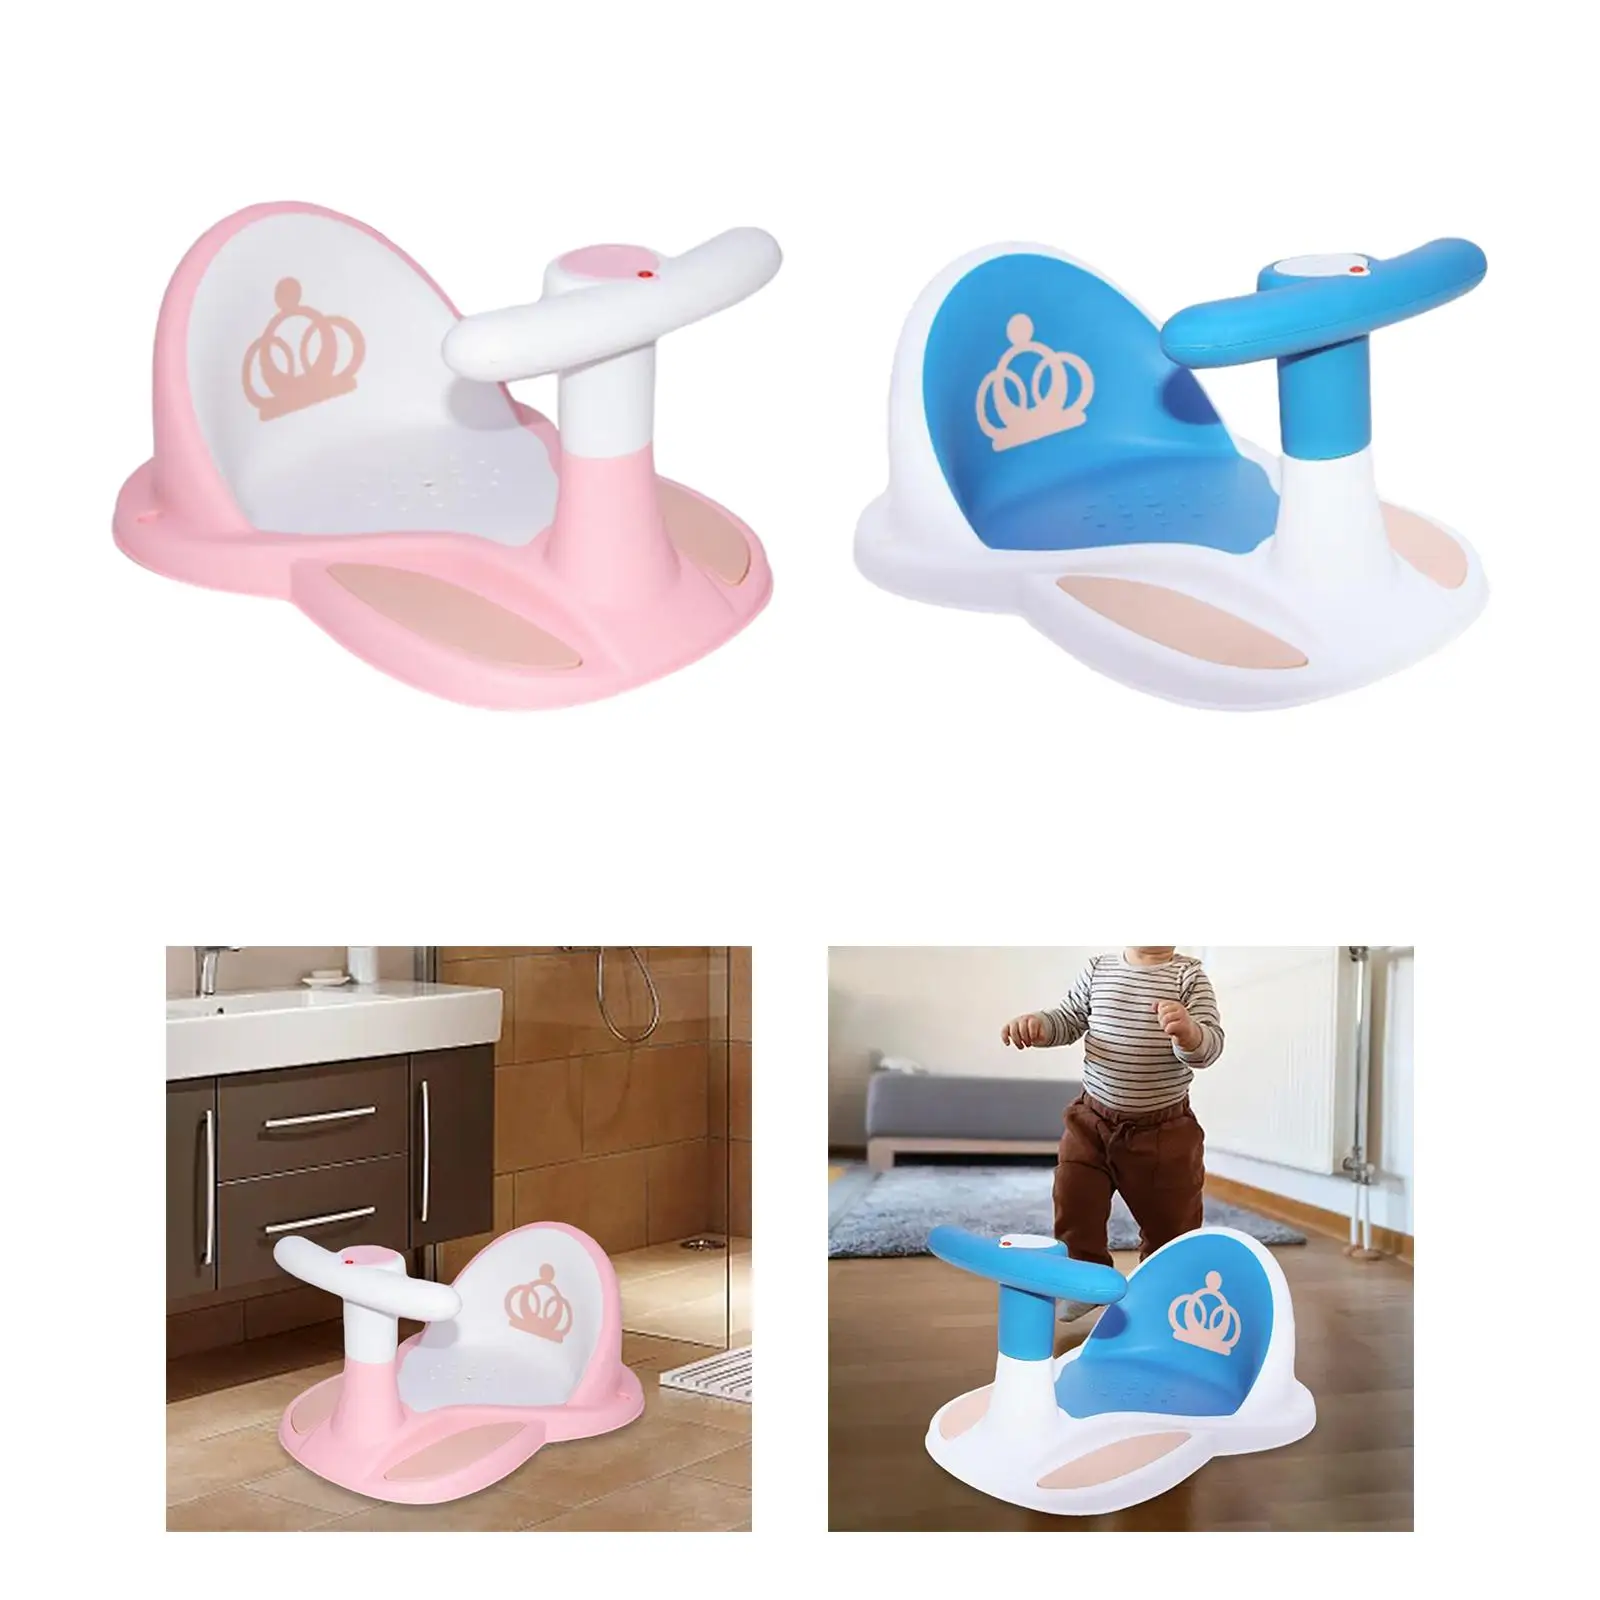 Toddlers Shower Seats Newborn Shower Seats Tub Sitting up Bathtub Chair Baby Bath Seat for Infants Boys Toddlers Kids Girls